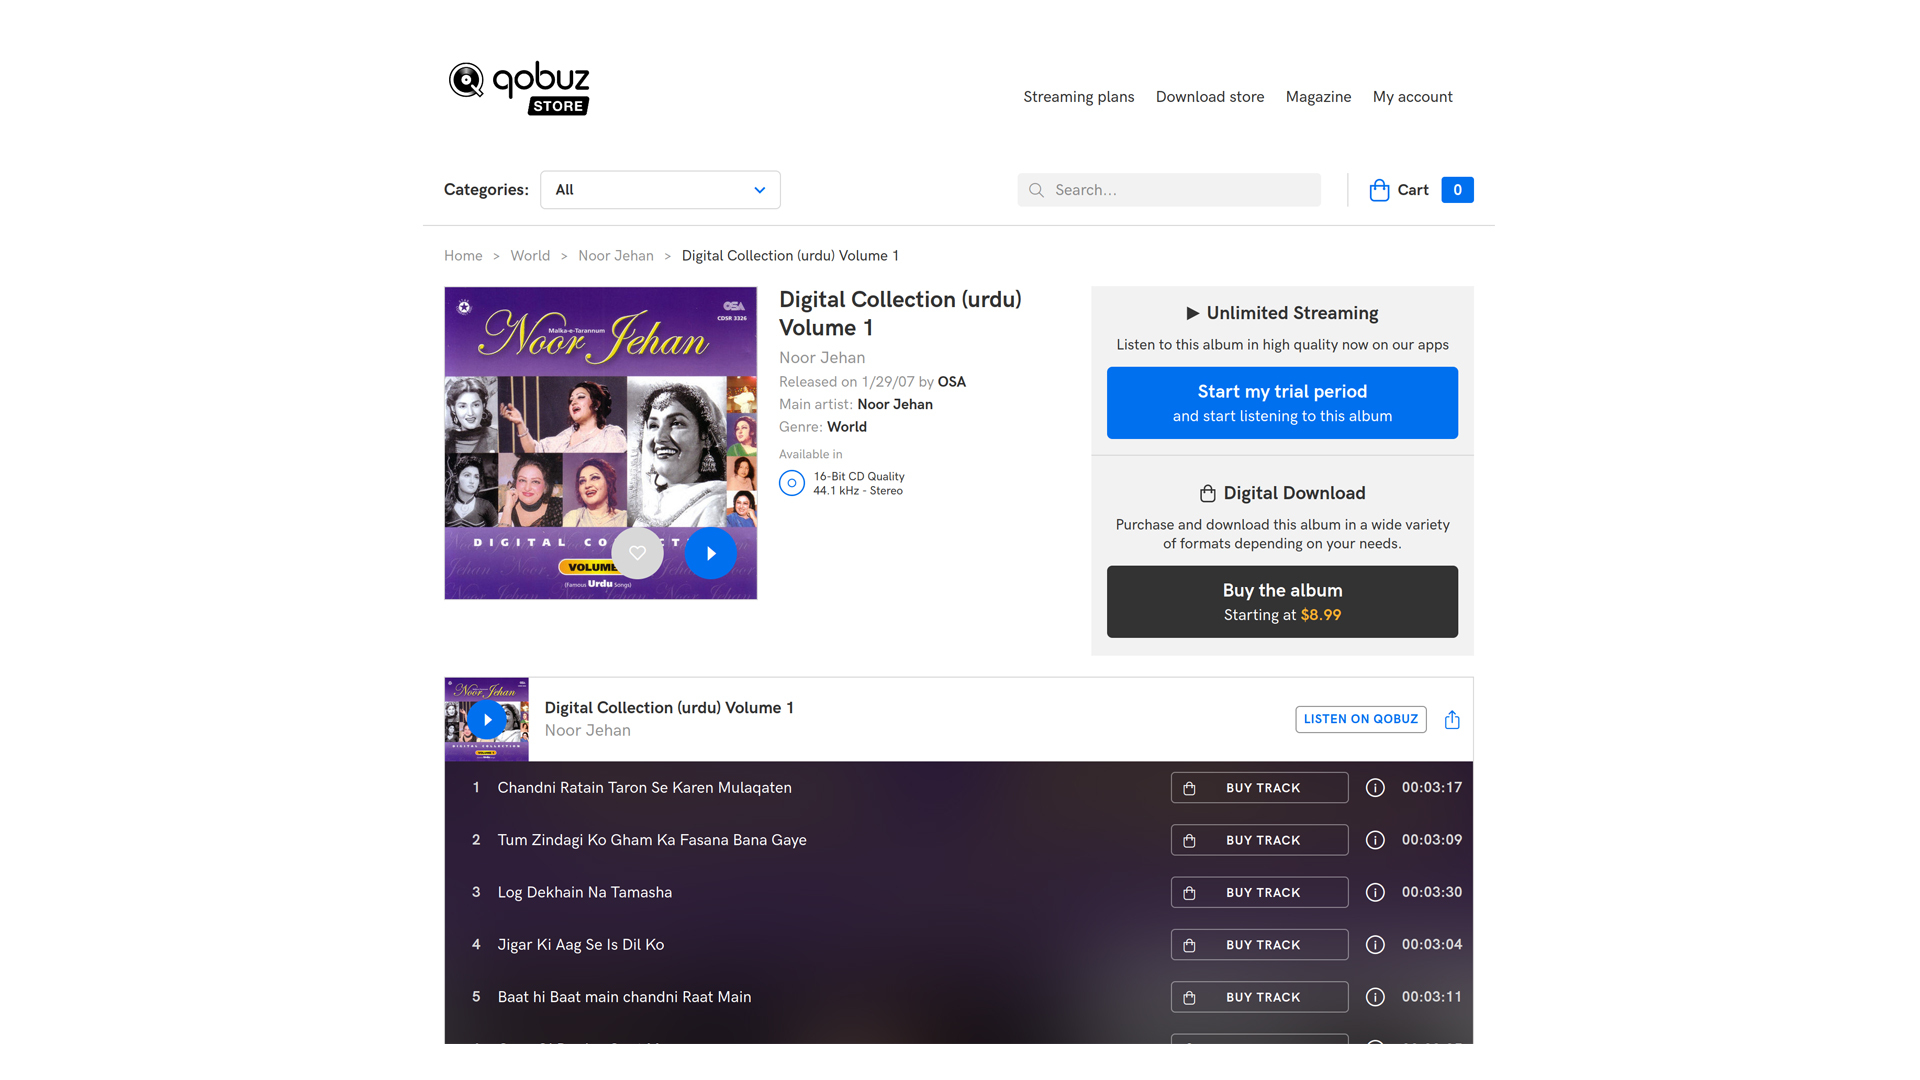 A screenshot of the Qobuz Store purchase page for the album &quot;Digital Collection (Urdu) Volume 1&quot; containing assorted hits by Pakistani artist Madam Noor Jahan. The &quot;Start my trial period&quot; blue-colored button and &quot;Buy the album; Starting at $8.99&quot; black-colored button are visible.